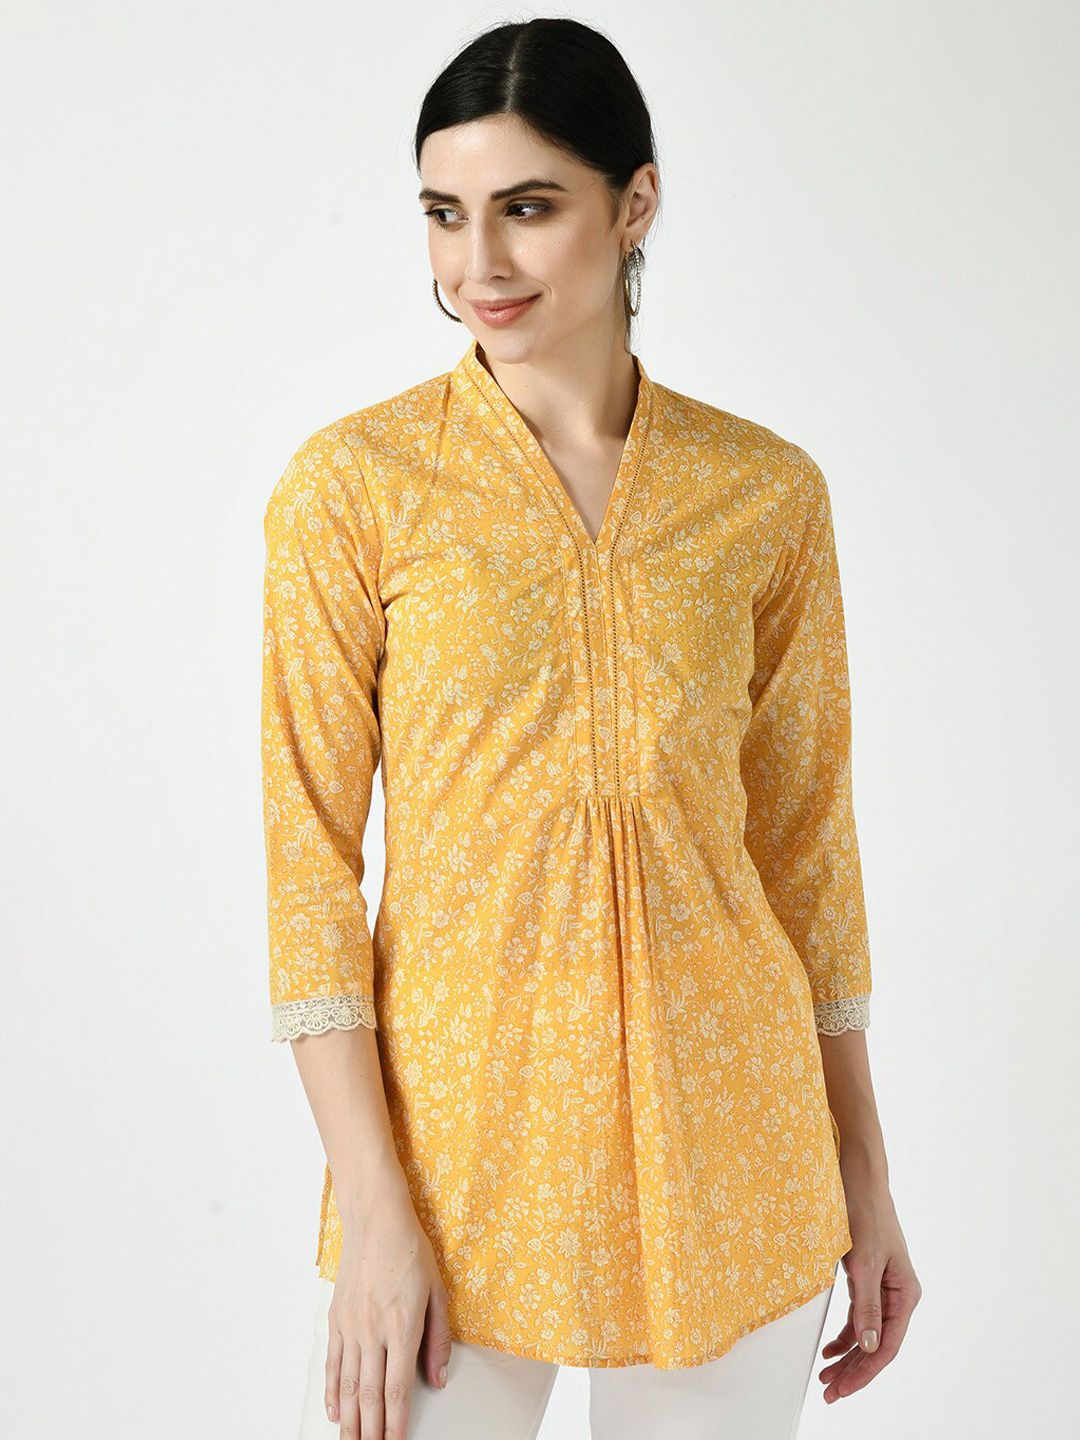 MEESAN Yellow Floral Print Longline Pure Cotton Ethnic Top Price in India